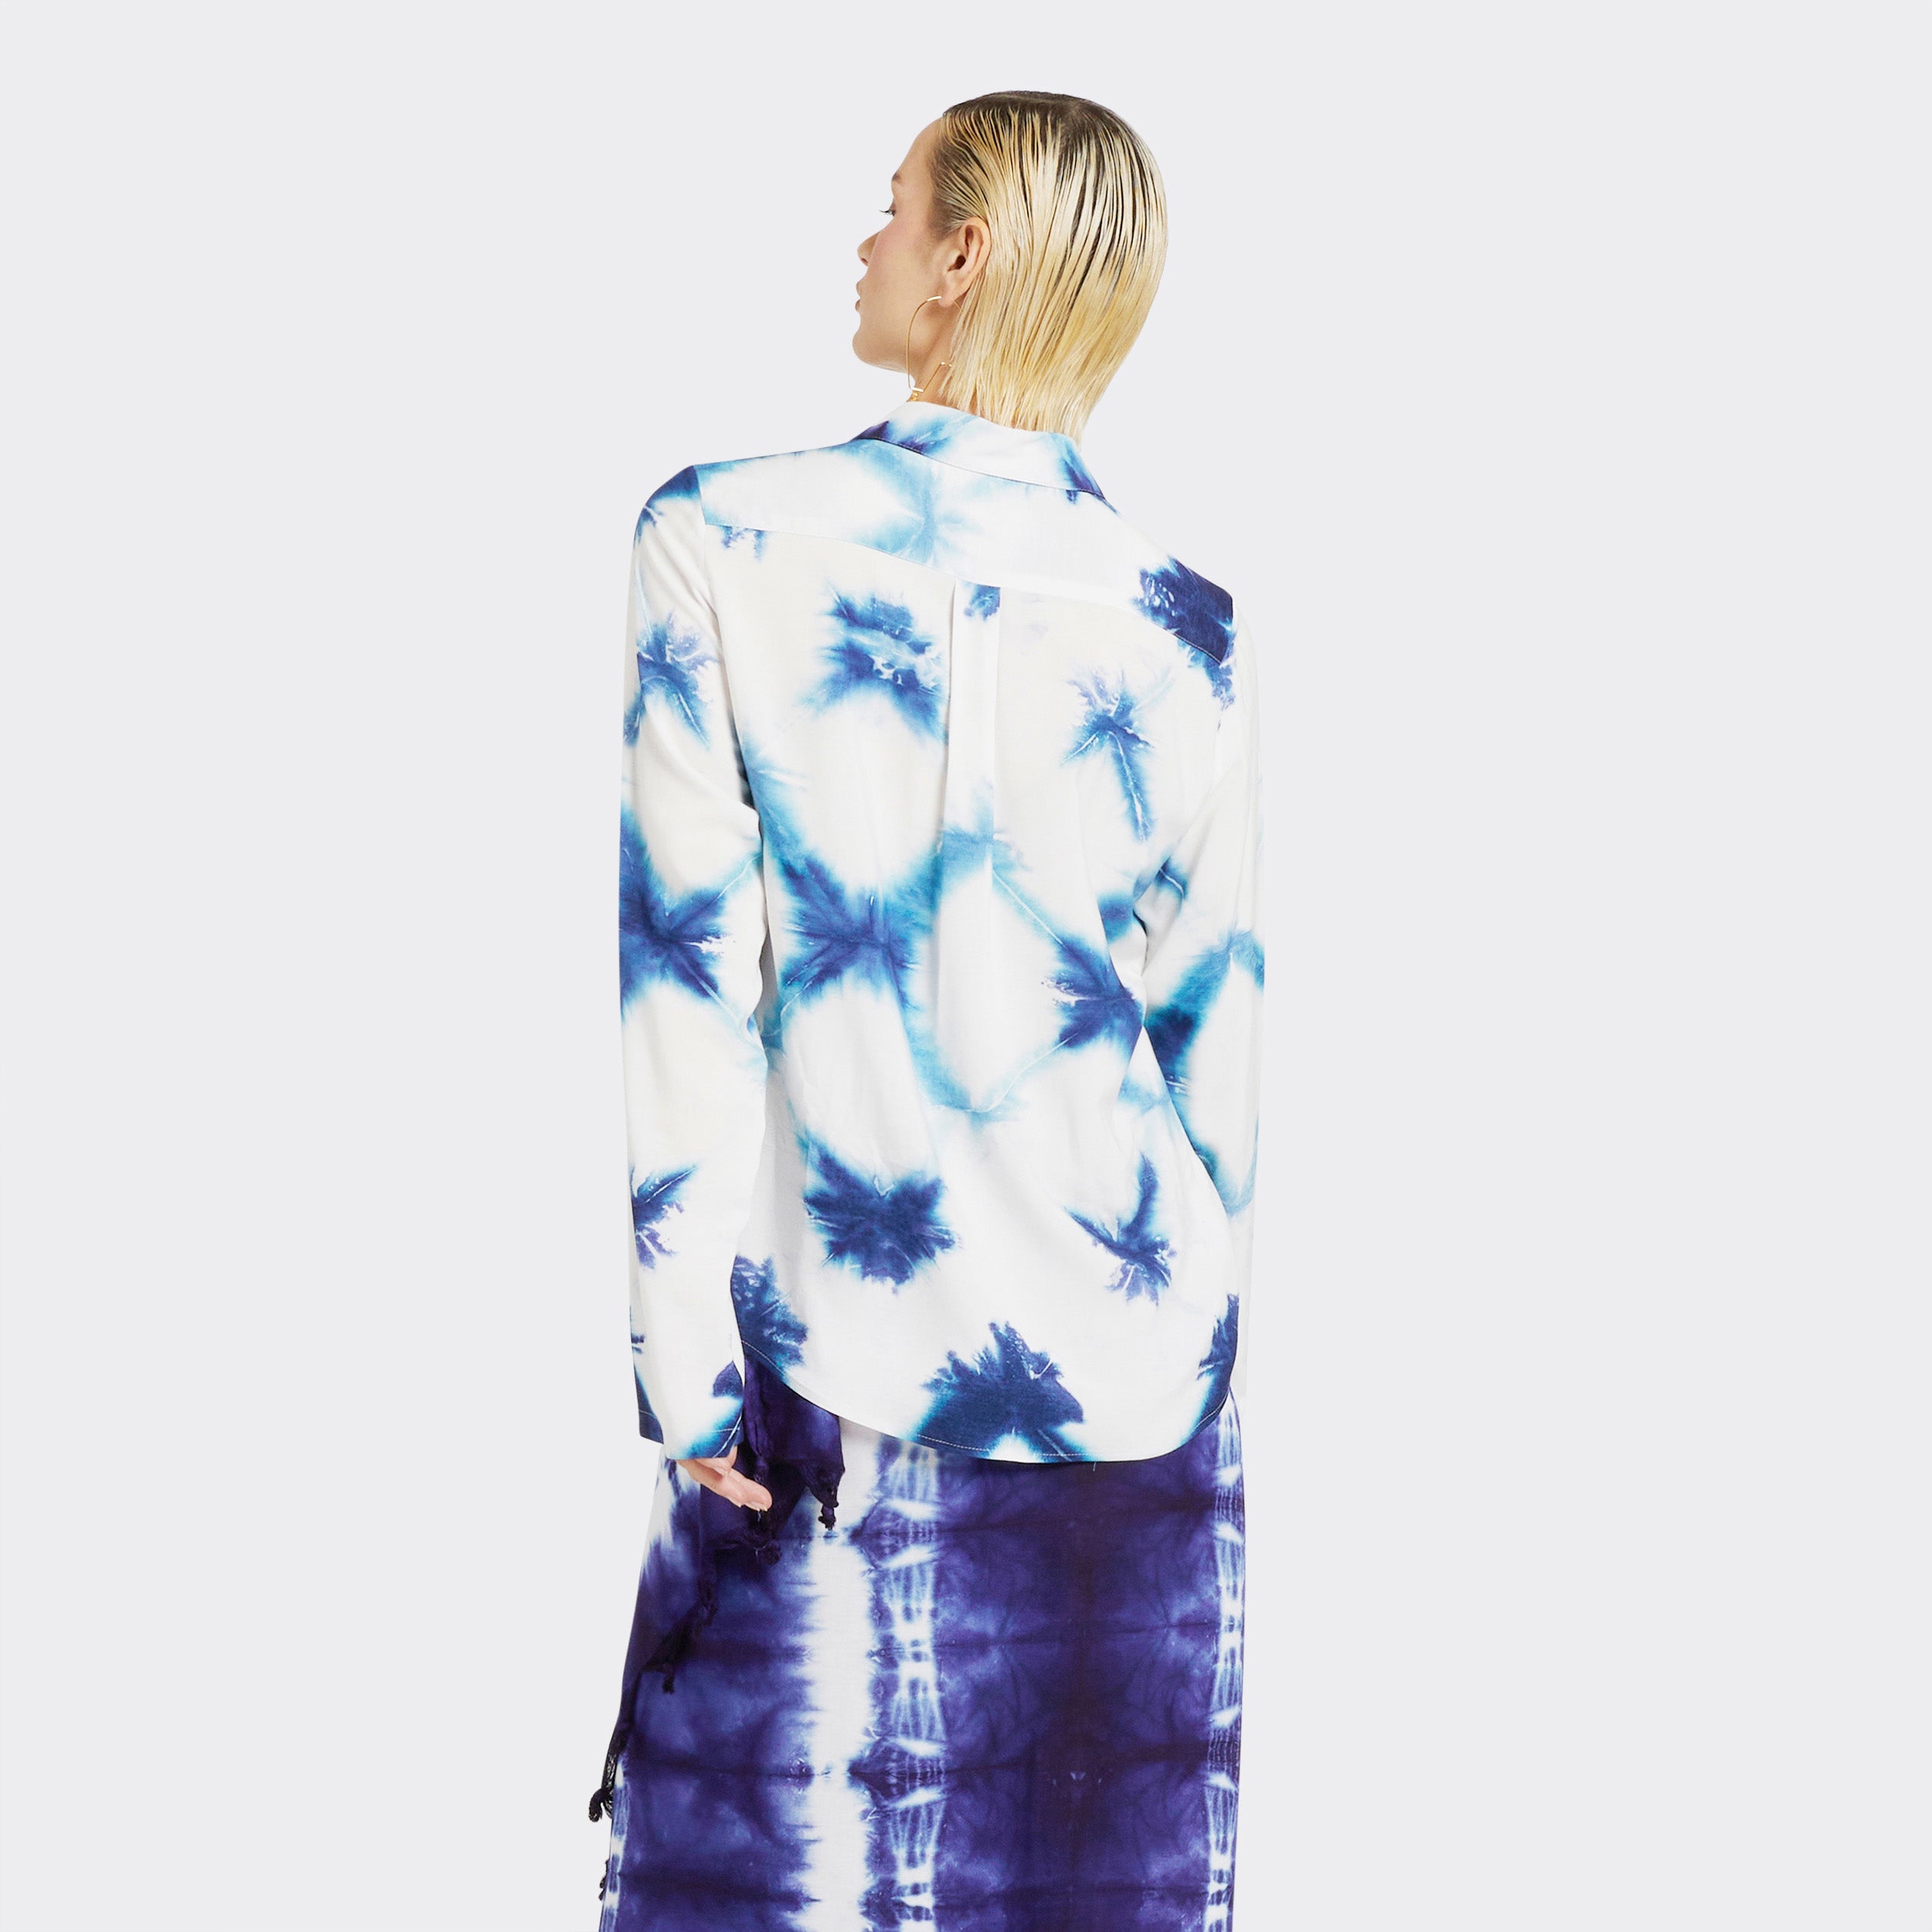 Model wears Shirt in Tie Dye White and Blue with a Pareo in Tie Dye Soft Blue.